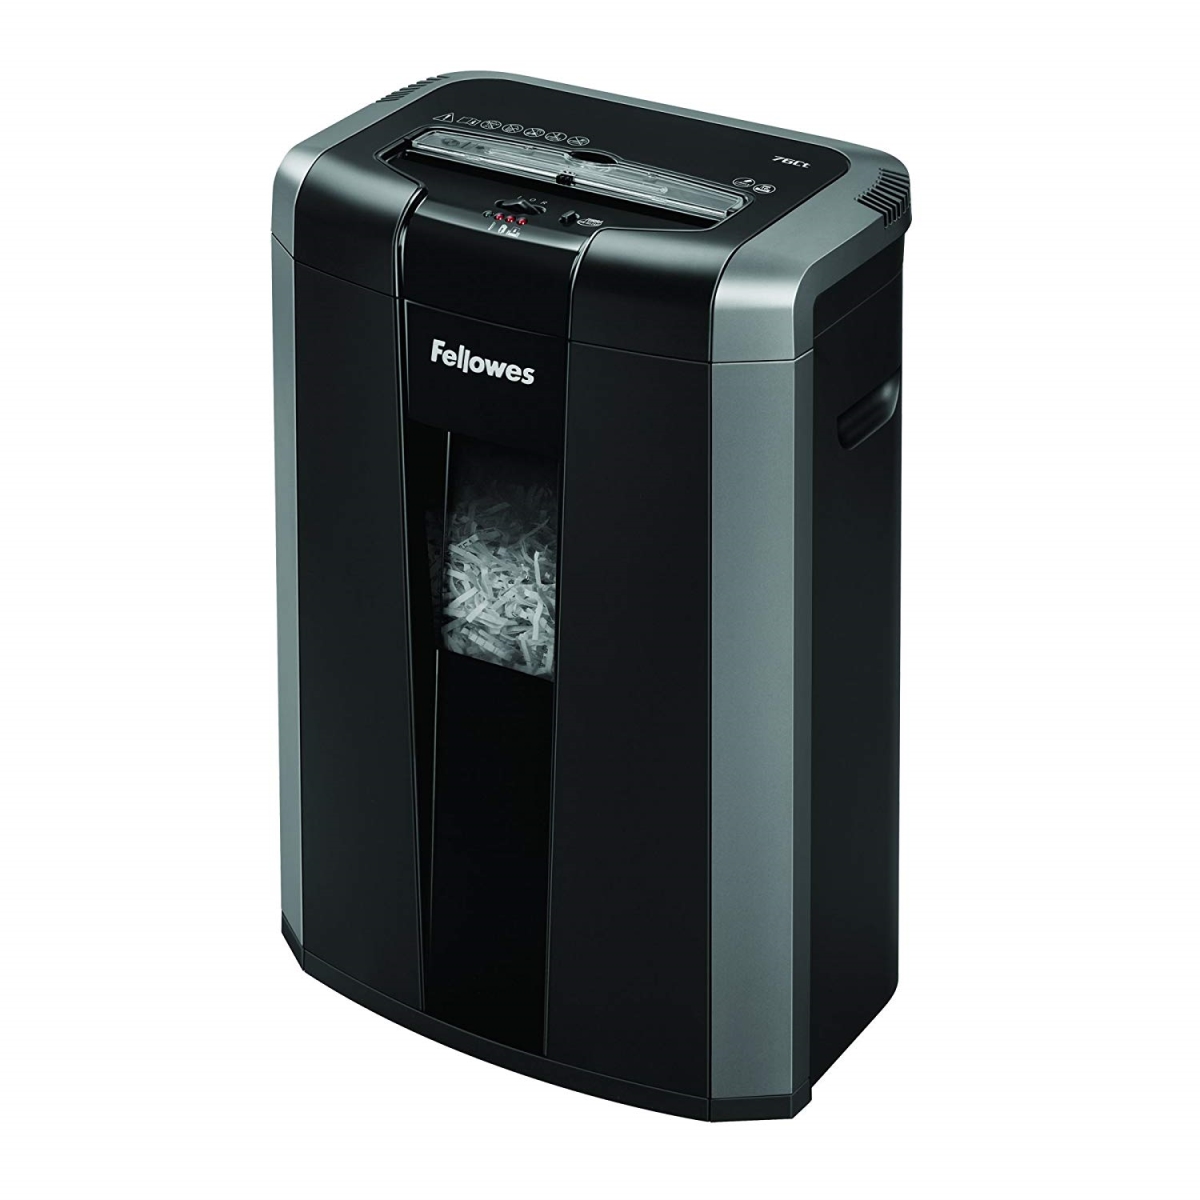 Fellowes 4676001 Powershred Cross-cut Shredder With 16 Sheet Capacity, 76 Count